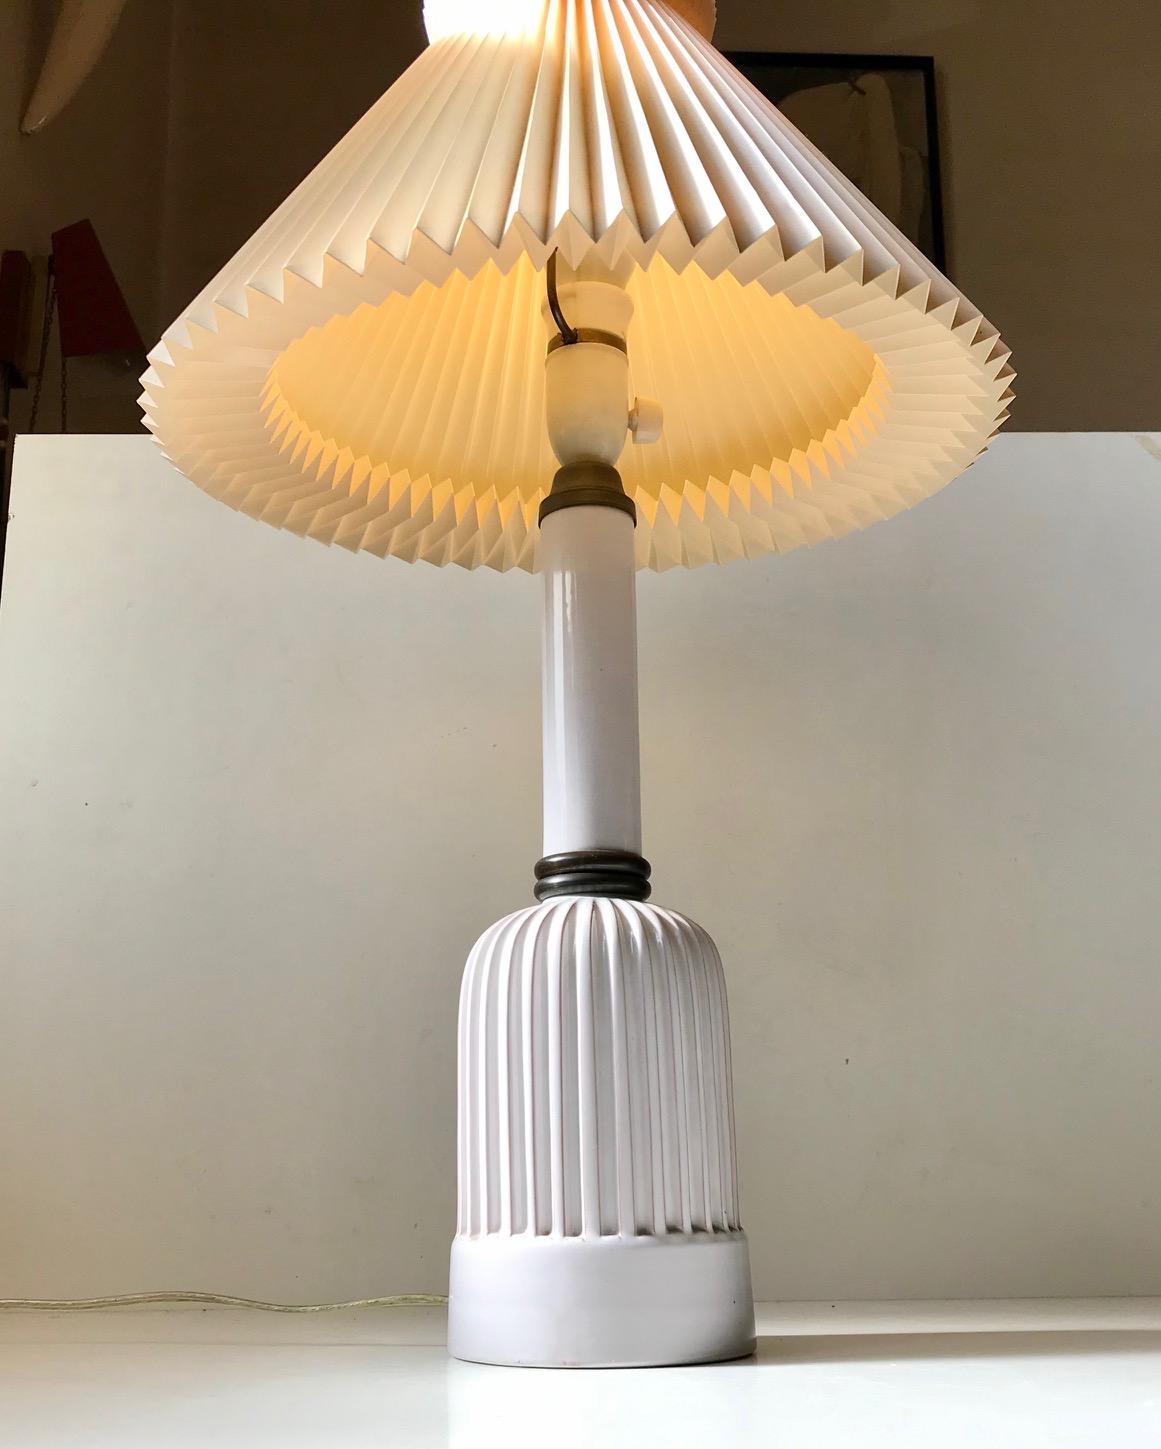 A rare and monumental version of the Danish Heiberg table lamp. It has a fluted - ribbed bottom part, bronze details and delicate white glaze to the out- and inside. It was designed and manufactured by Christian Schollert in Naerum Denmark during